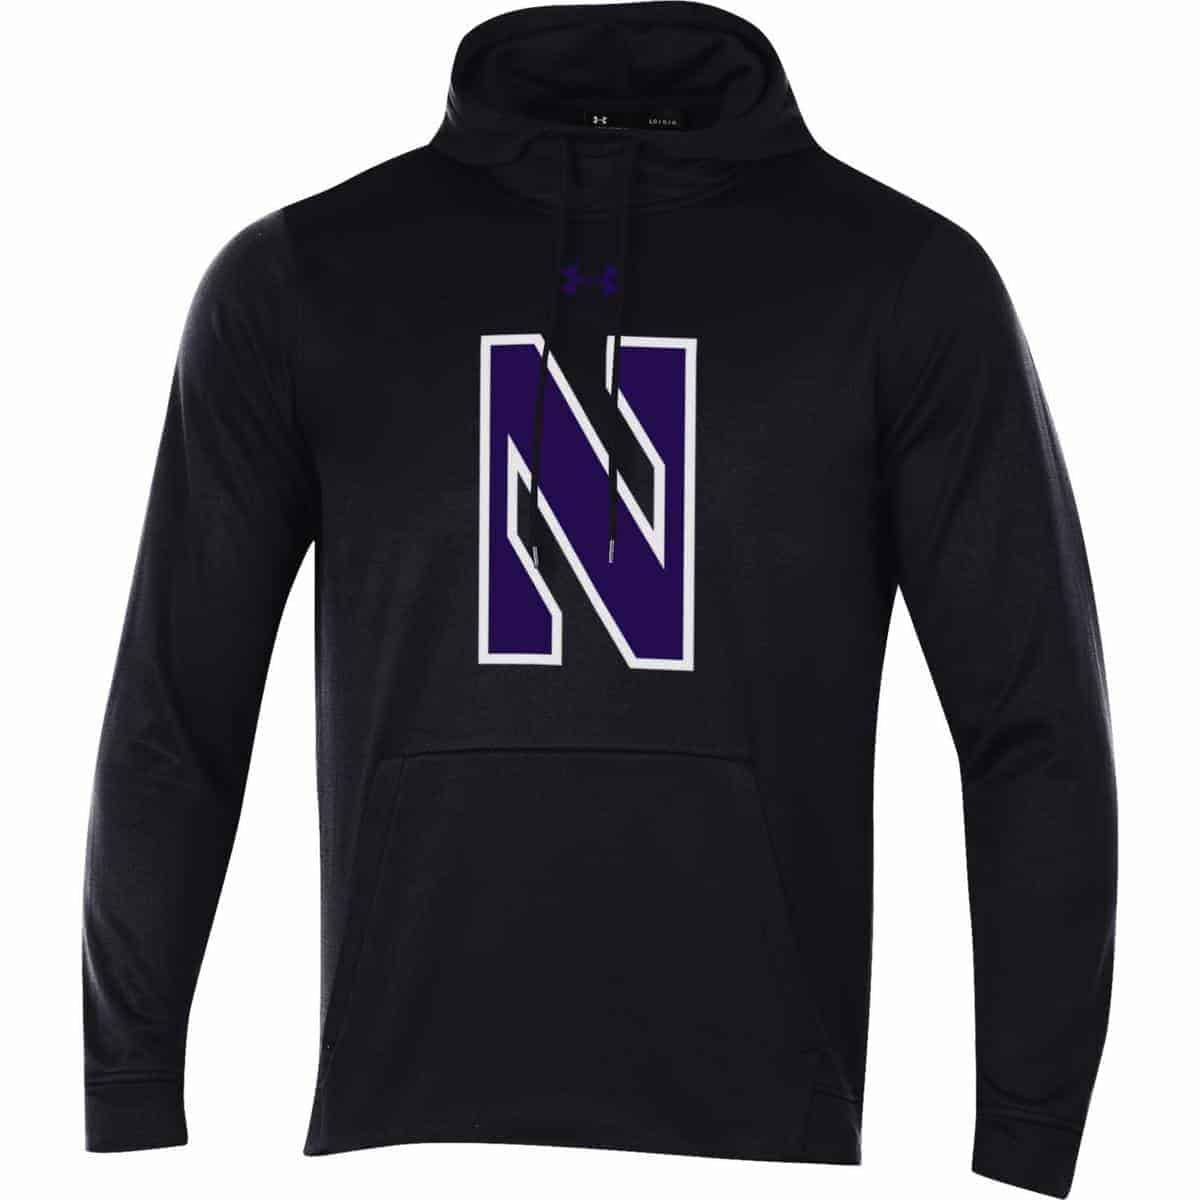 Northwestern Wildcats Youth Under Armour Tactical Tech™ Black Short Sleeve  T-Shirt with Stylized N Gothic Design